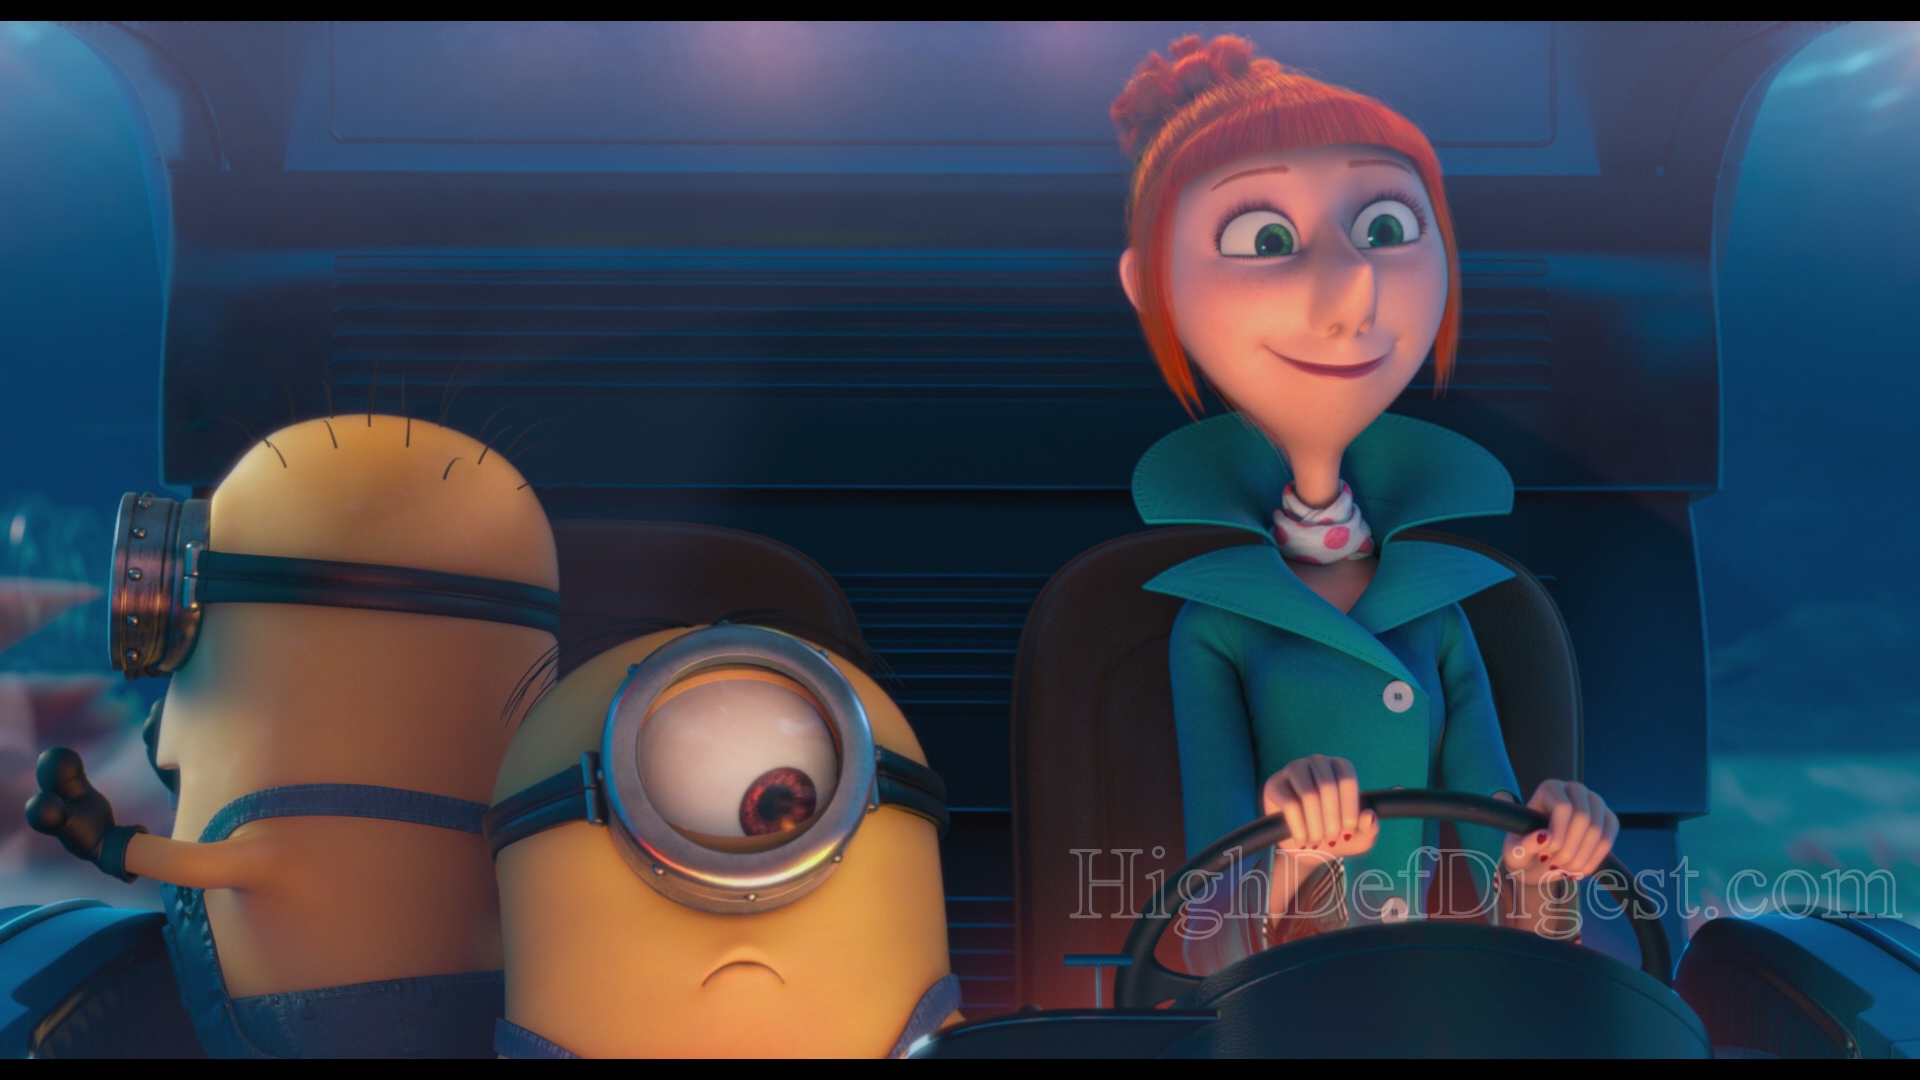 despicable me 2 characters girls